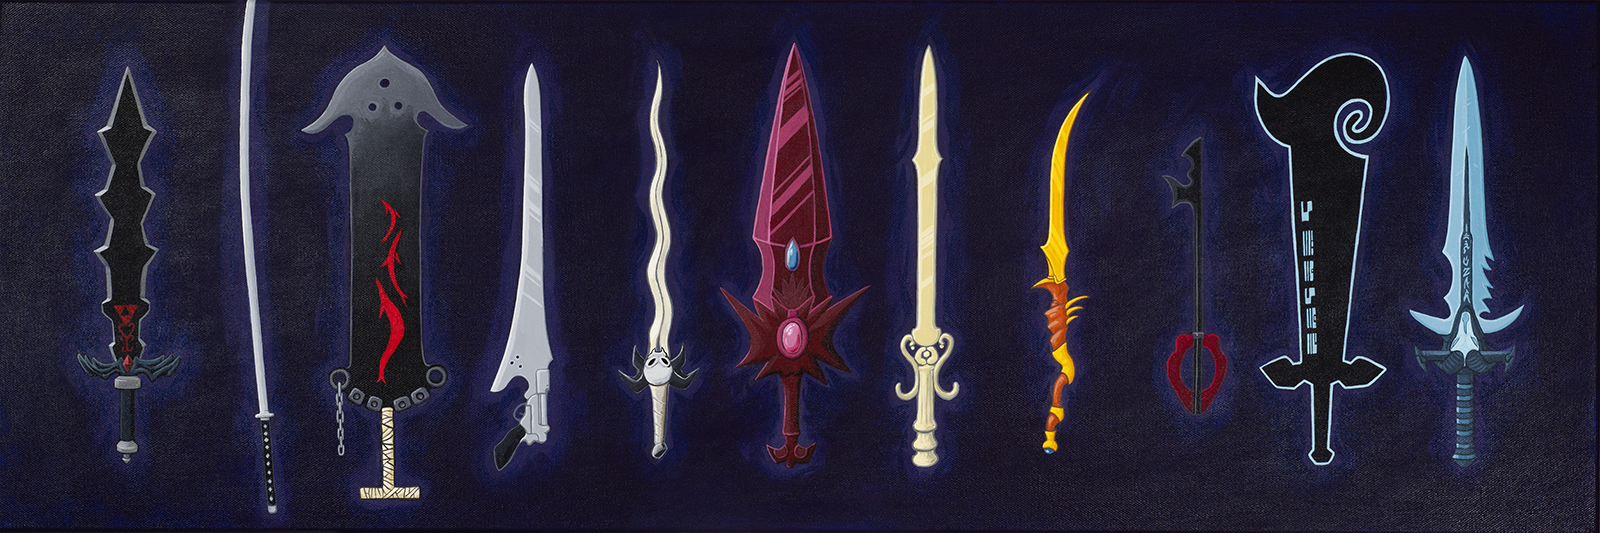 Heroes or Villains Swords - Limited Edition Archival Print picture